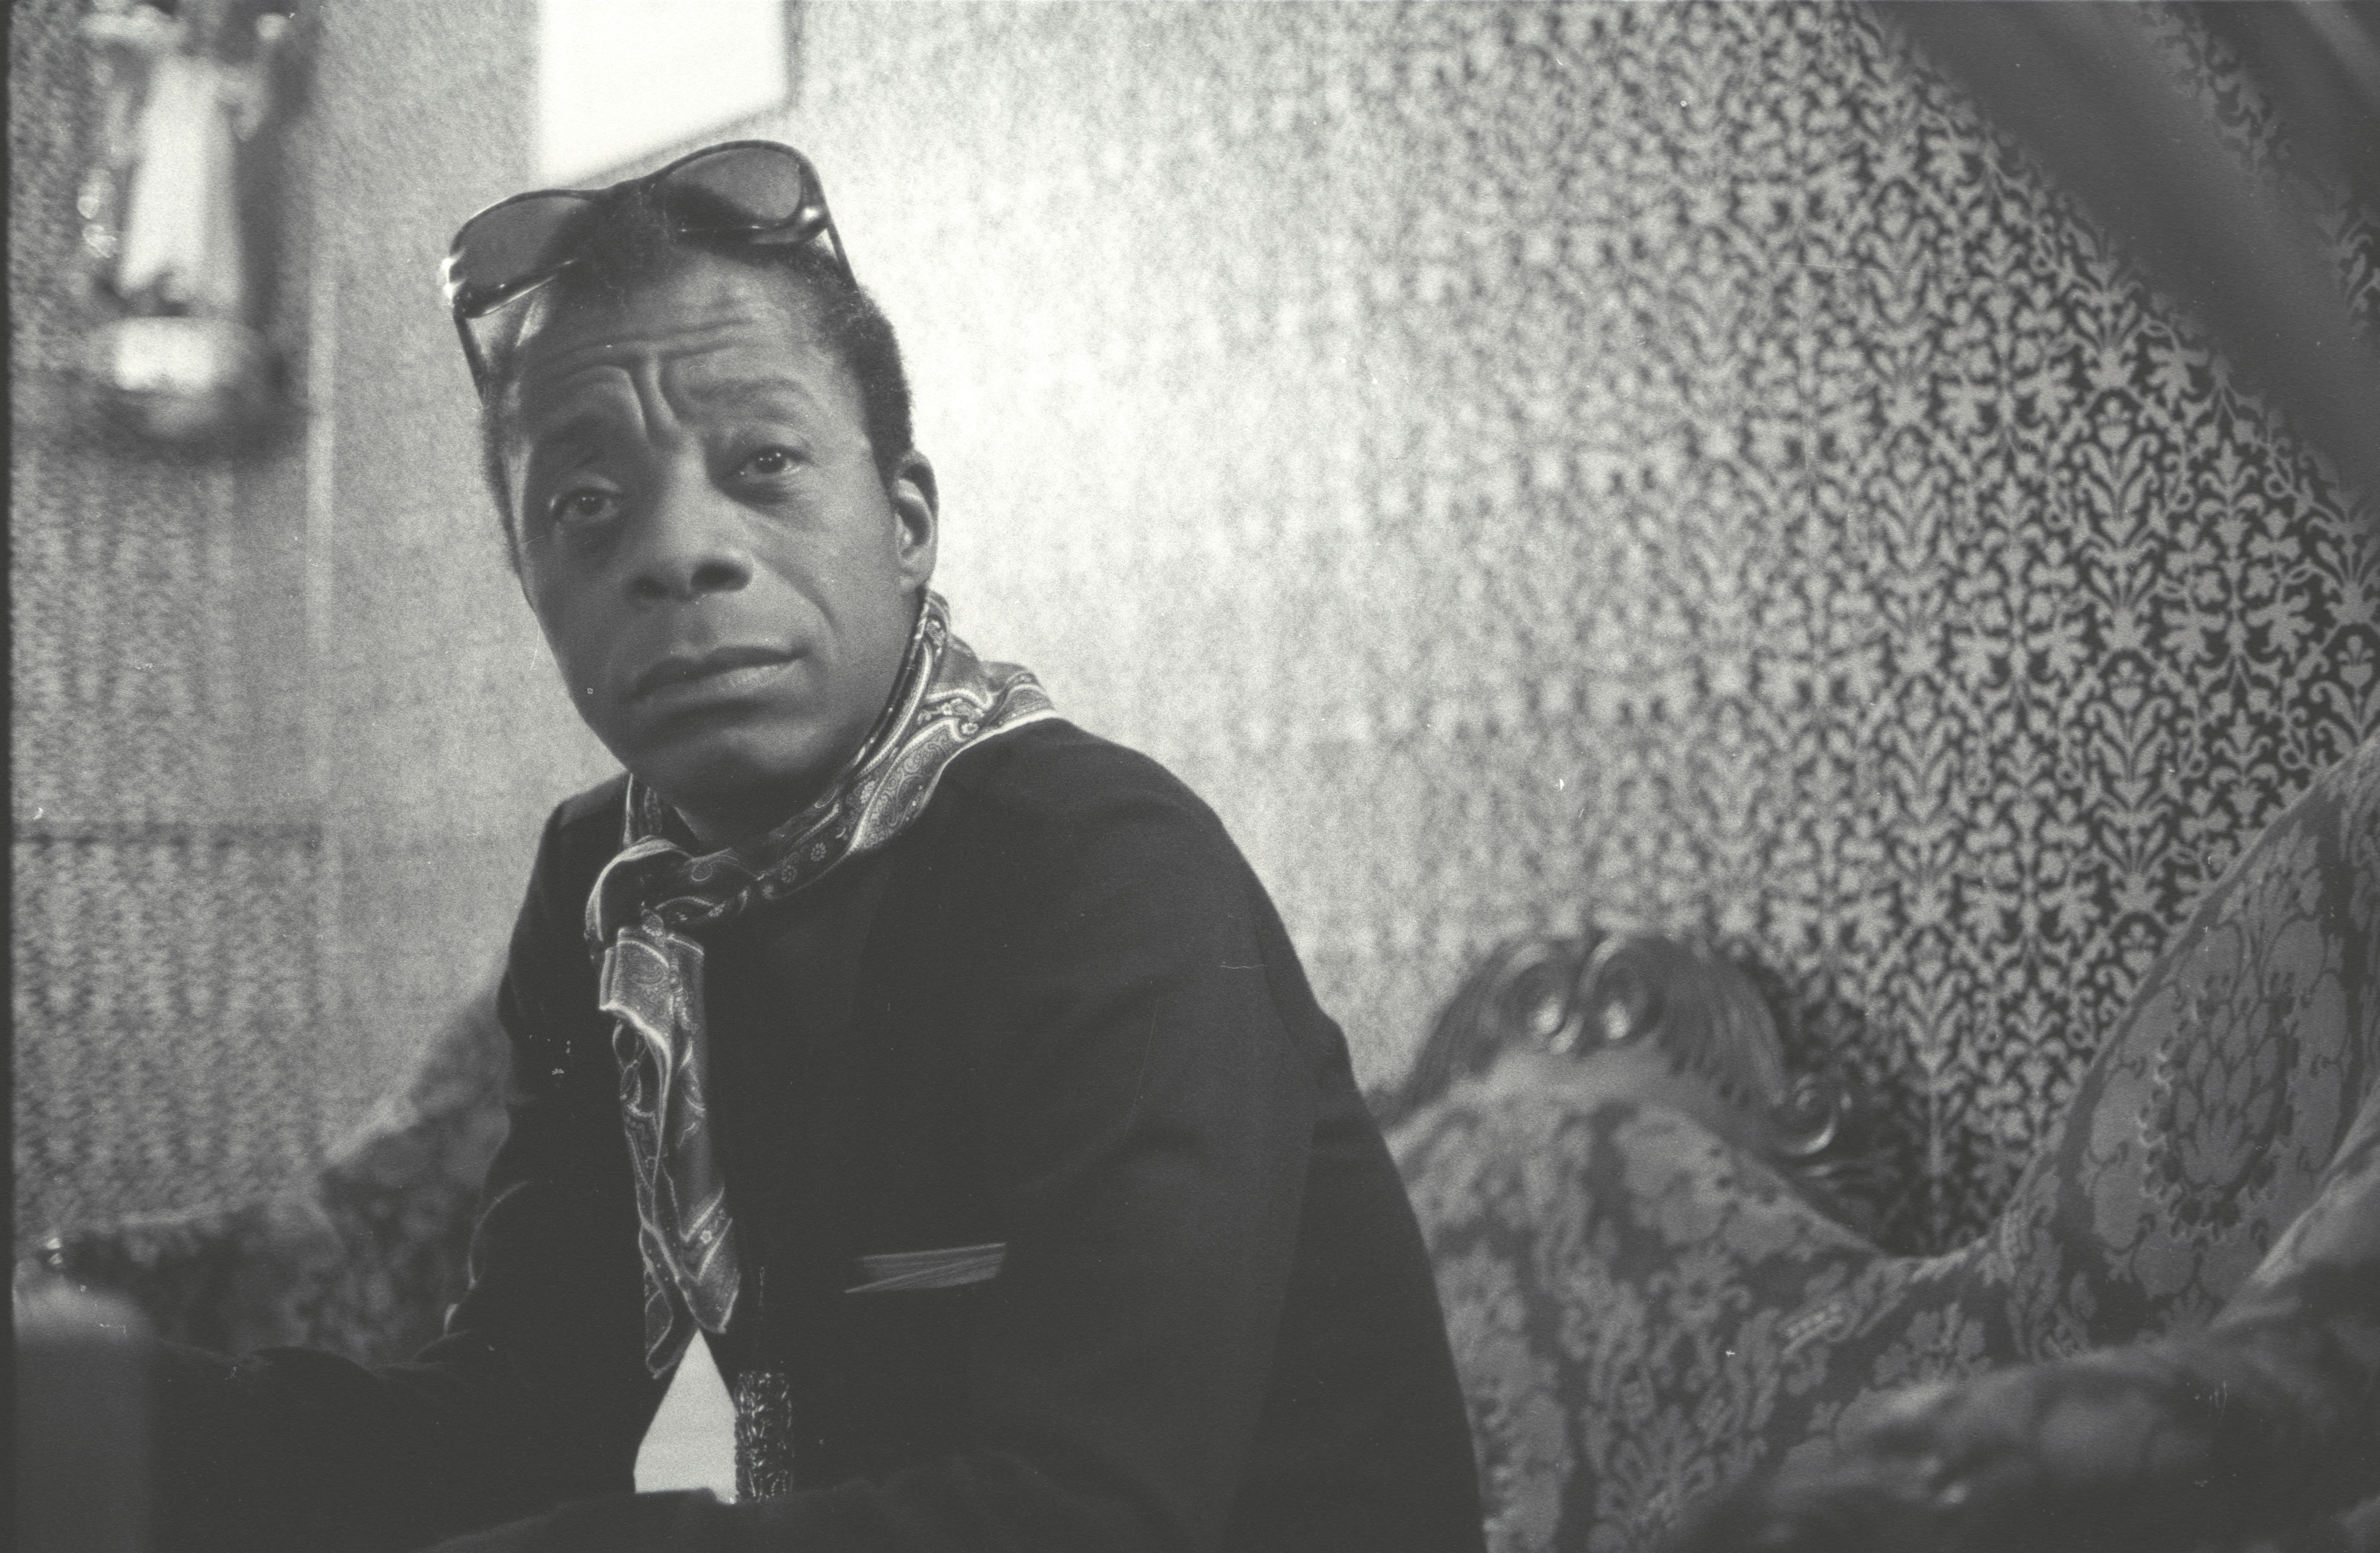 James Baldwin exhibition added to Smithsonian’s National Portrait Gallery in DC